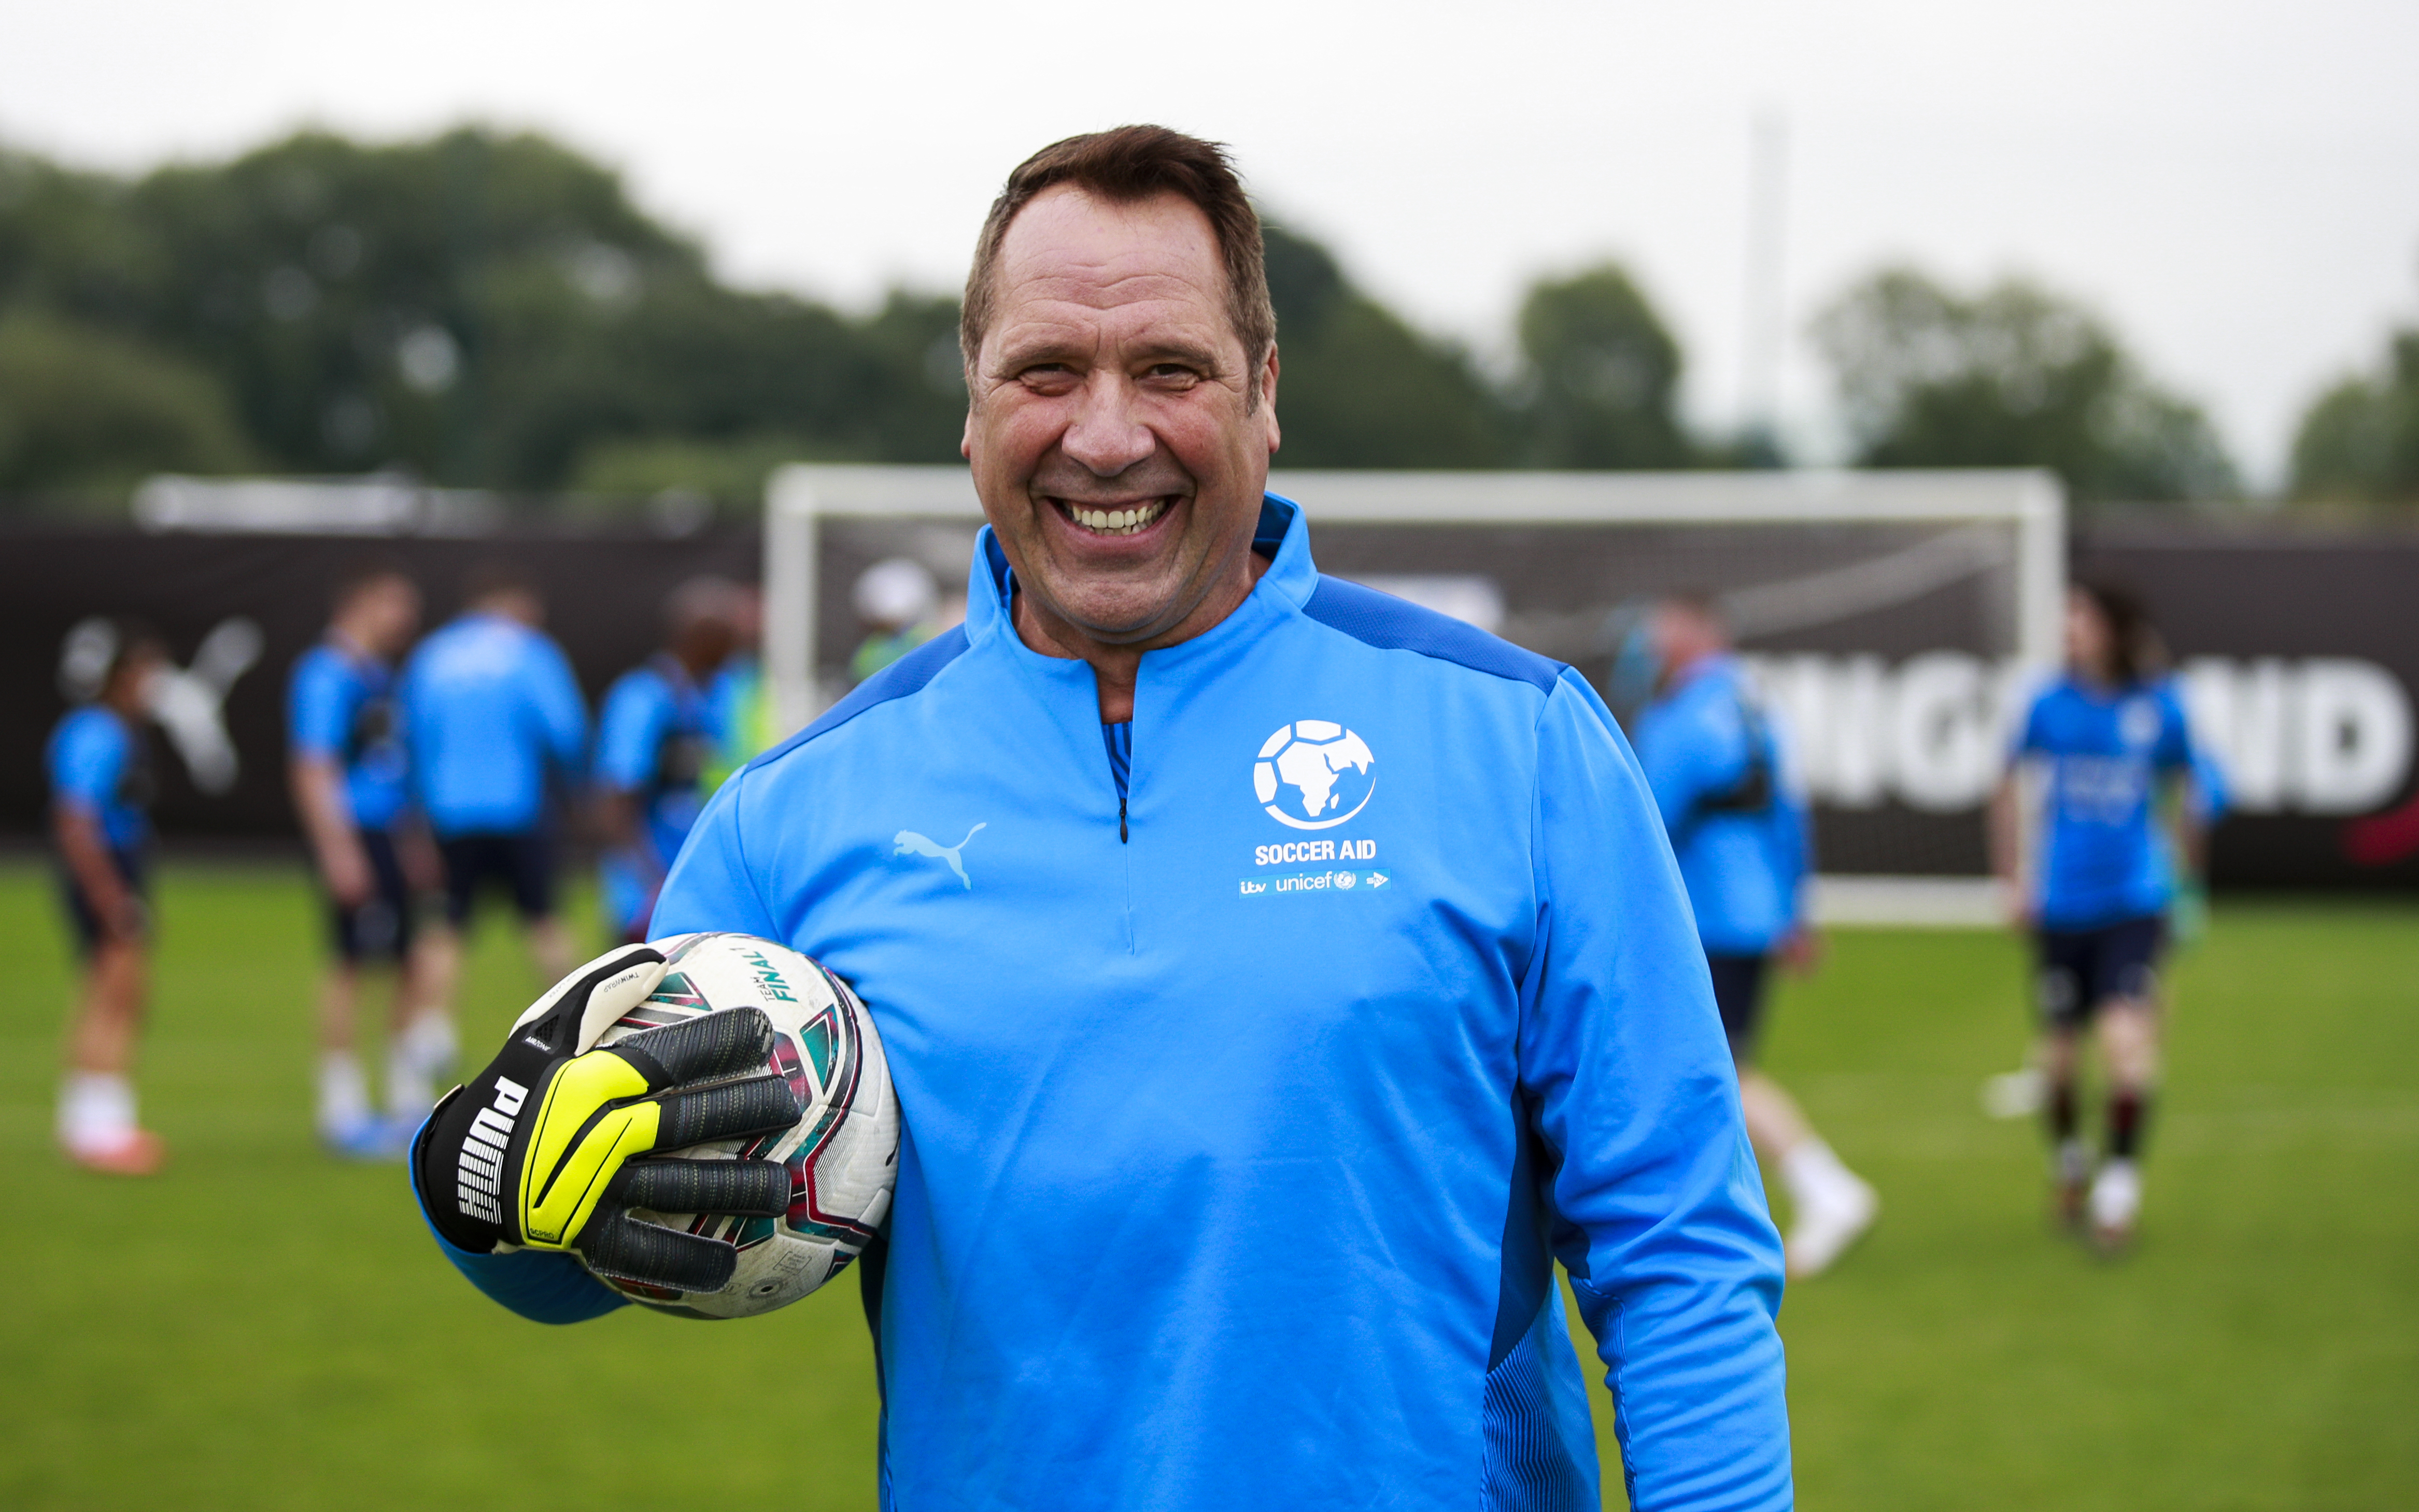 Former Arsenal goalkeeper David Seaman is coaching the England team for Soccer Aid 2022.